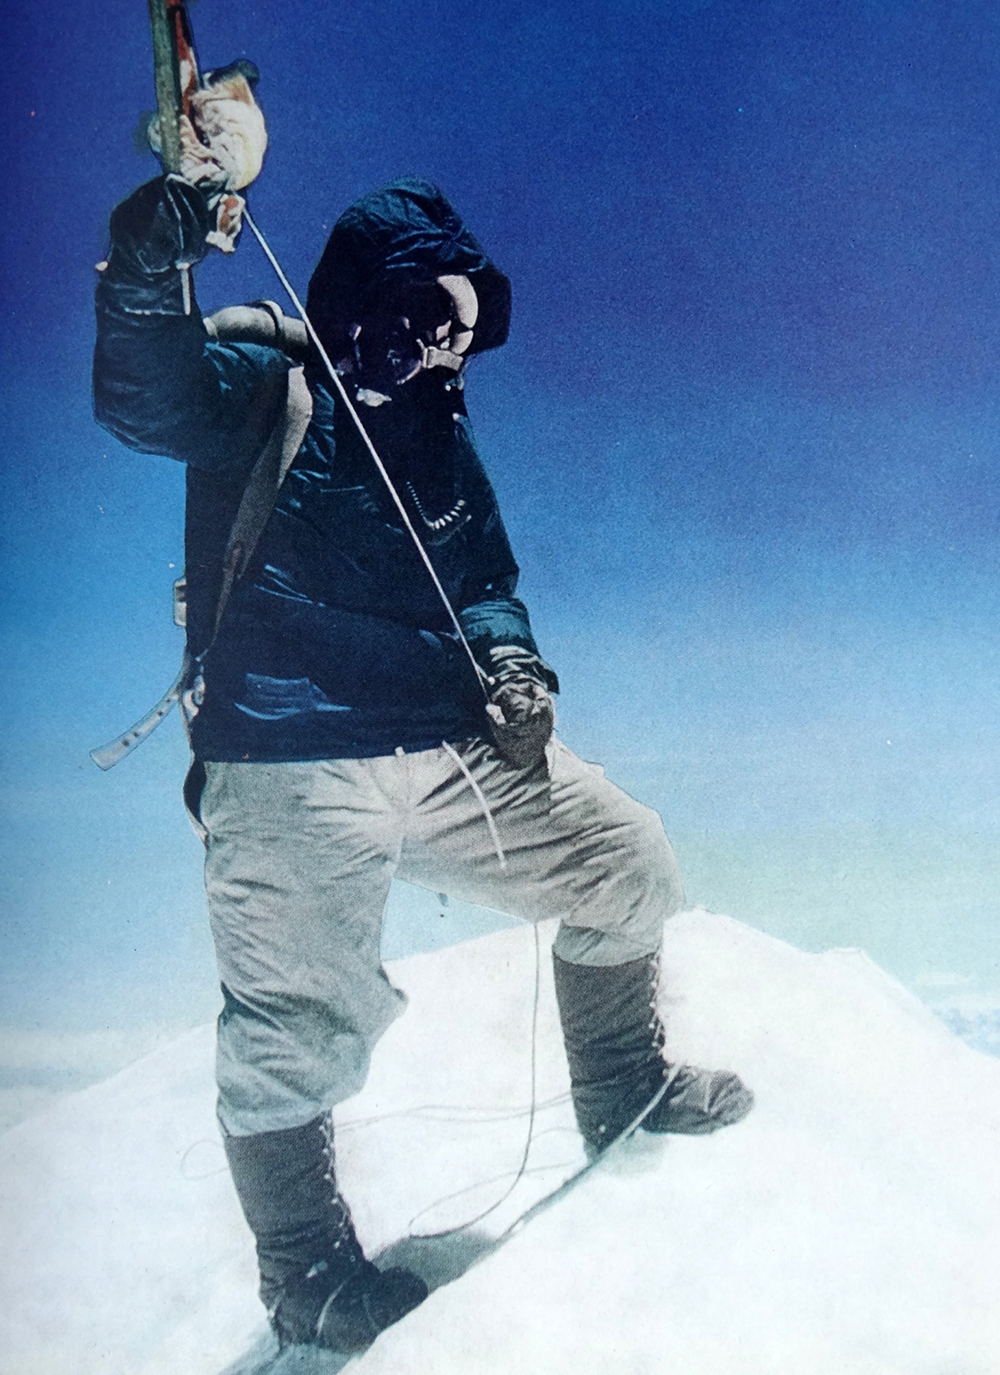 Tenzing Norgay (29 May 1914 ¬Ц 9 May 1986), referred to as Sherpa Tenzing, was a Nepalese Sherpa mountaineer. Sir Edmund Percival Hillary KG ONZ KBE (20 July 1919 ¬Ц 11 January 2008) was a New Zealand mountaineer, explorer and philanthropist. On 29 May 1953, Hillary and Nepalese Sherpa mountaineer Tenzing Norgay became the first climbers to reach the summit of Mount Everest. Hillary took the famous photo of Tenzing posing with his ice-axe, according to Tenzing's autobiography Man of Everest, when Tenzing offered to take Hillary's photograph Hillary declined: (Photo by: Universal History Archive/UIG via Getty Images)